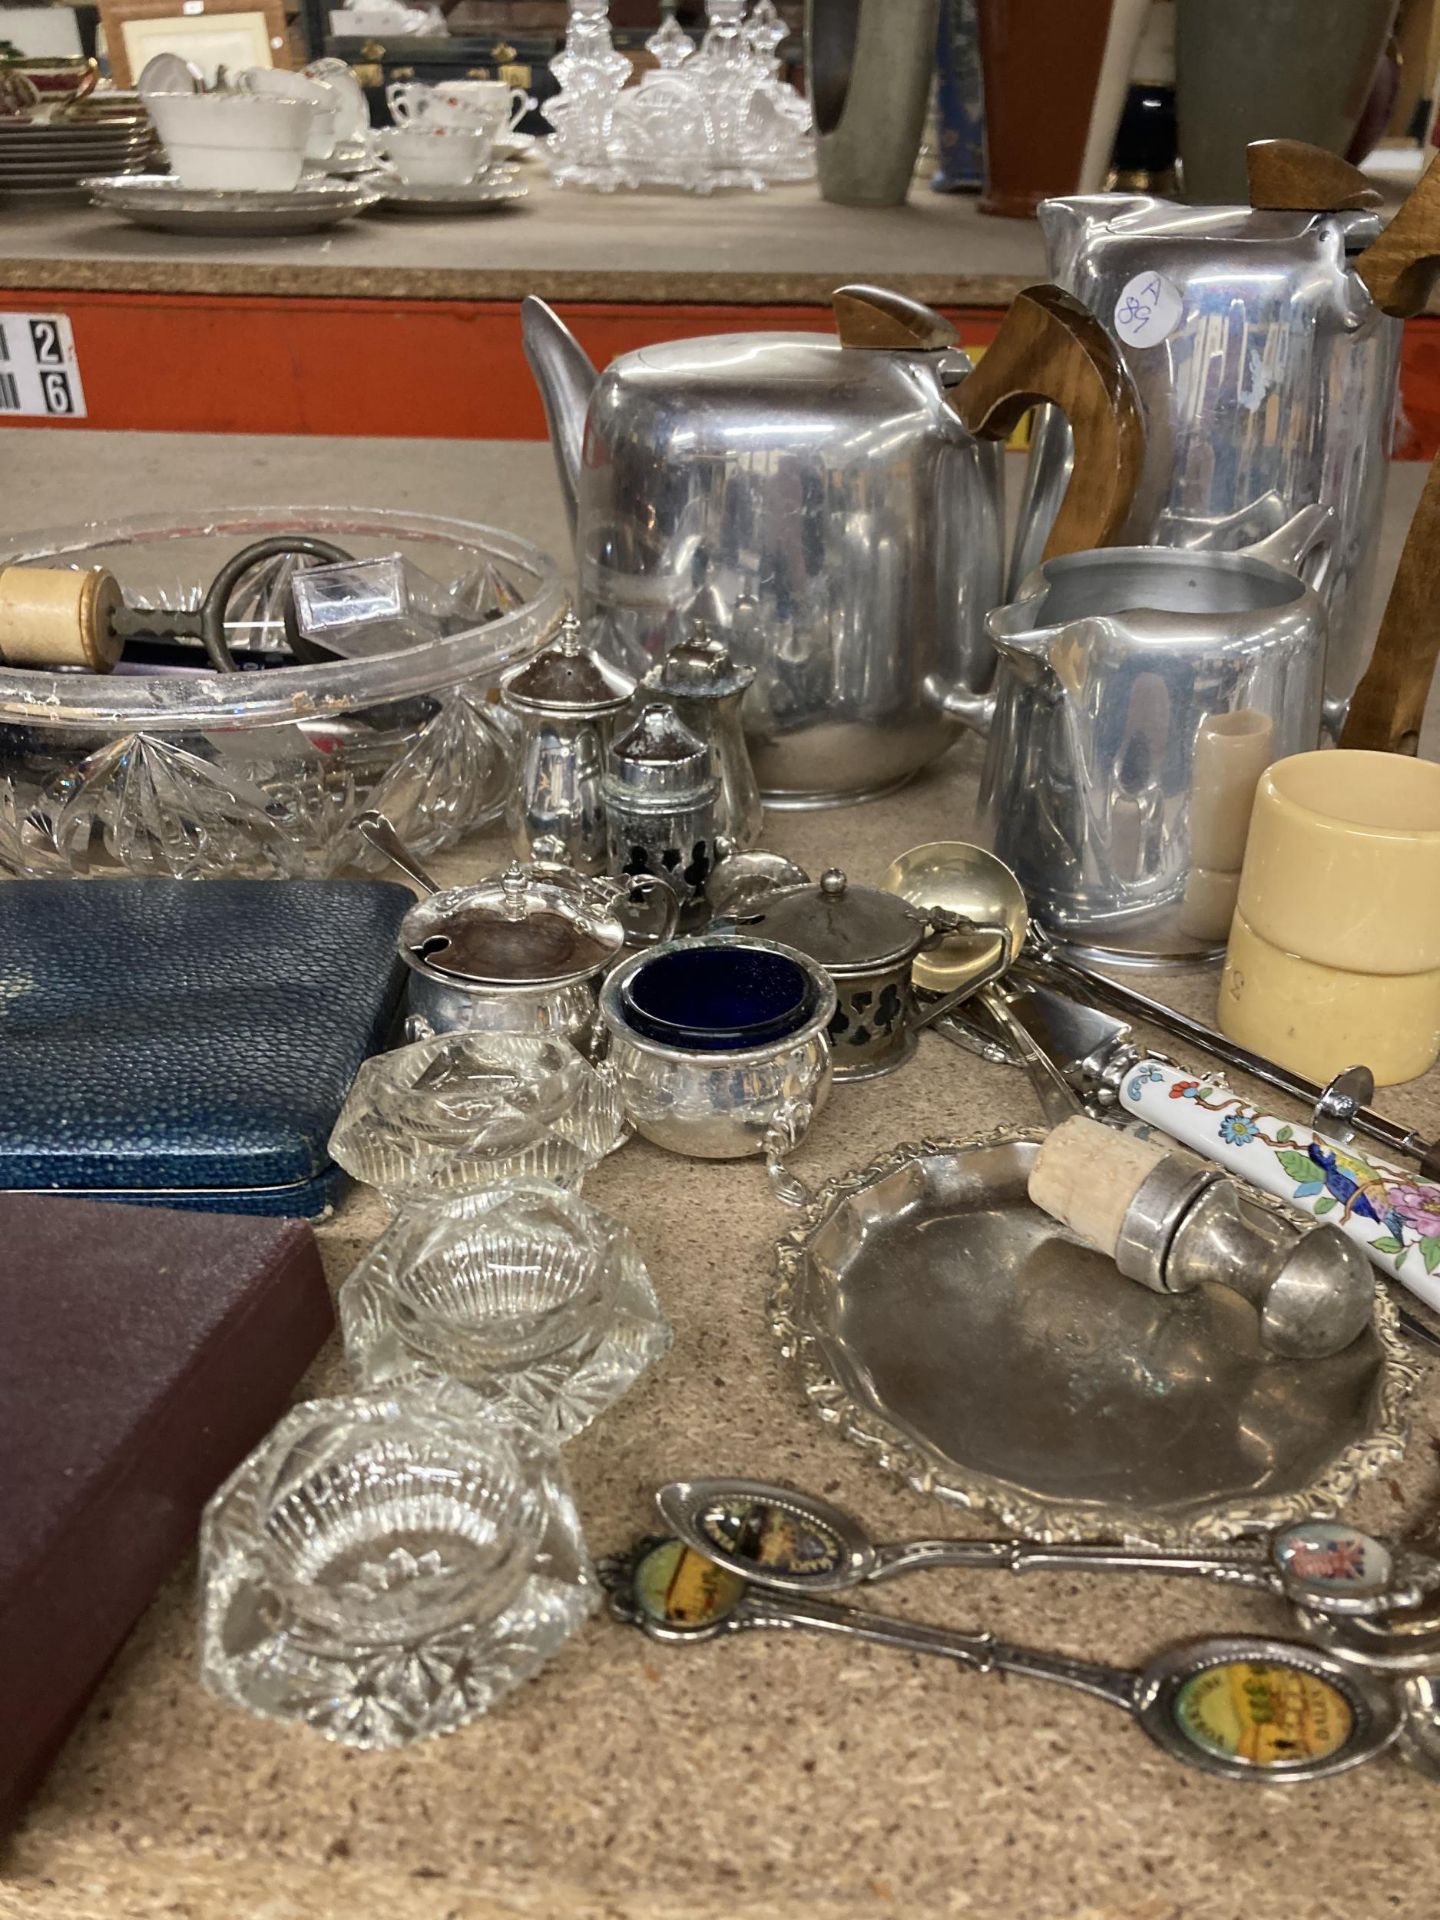 A MIXED VINTAGE LOT TO INCLUDE A PICQUOT WARE TEASET, NAPKIN RINGS, FLATWARE, SILVER PLATED - Image 3 of 4